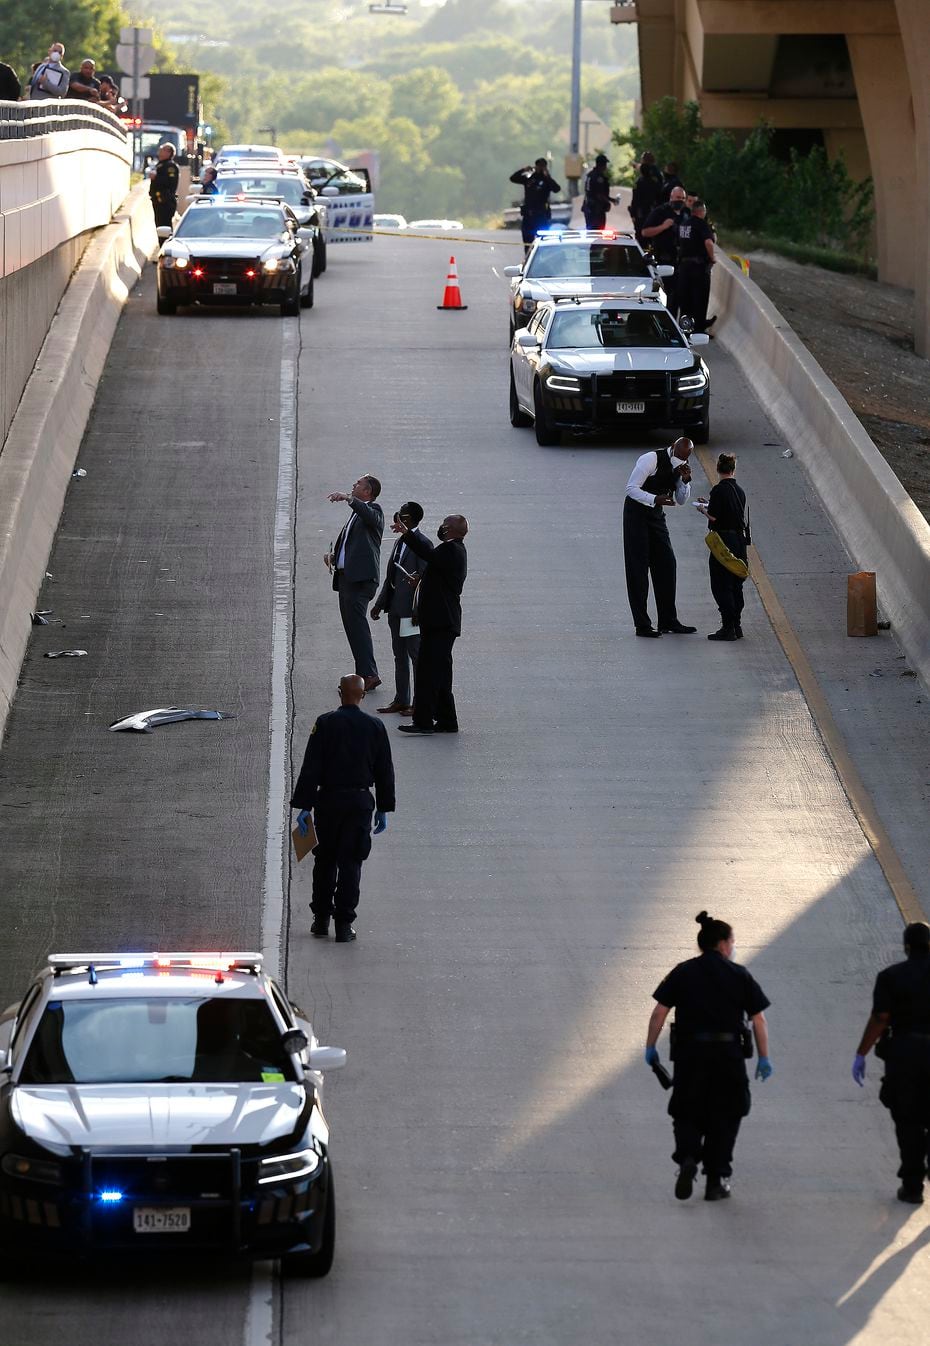 Police investigated after officers fatally shot a man armed with a replica gun Monday on the service road of Interstate 635 near Coit Road.